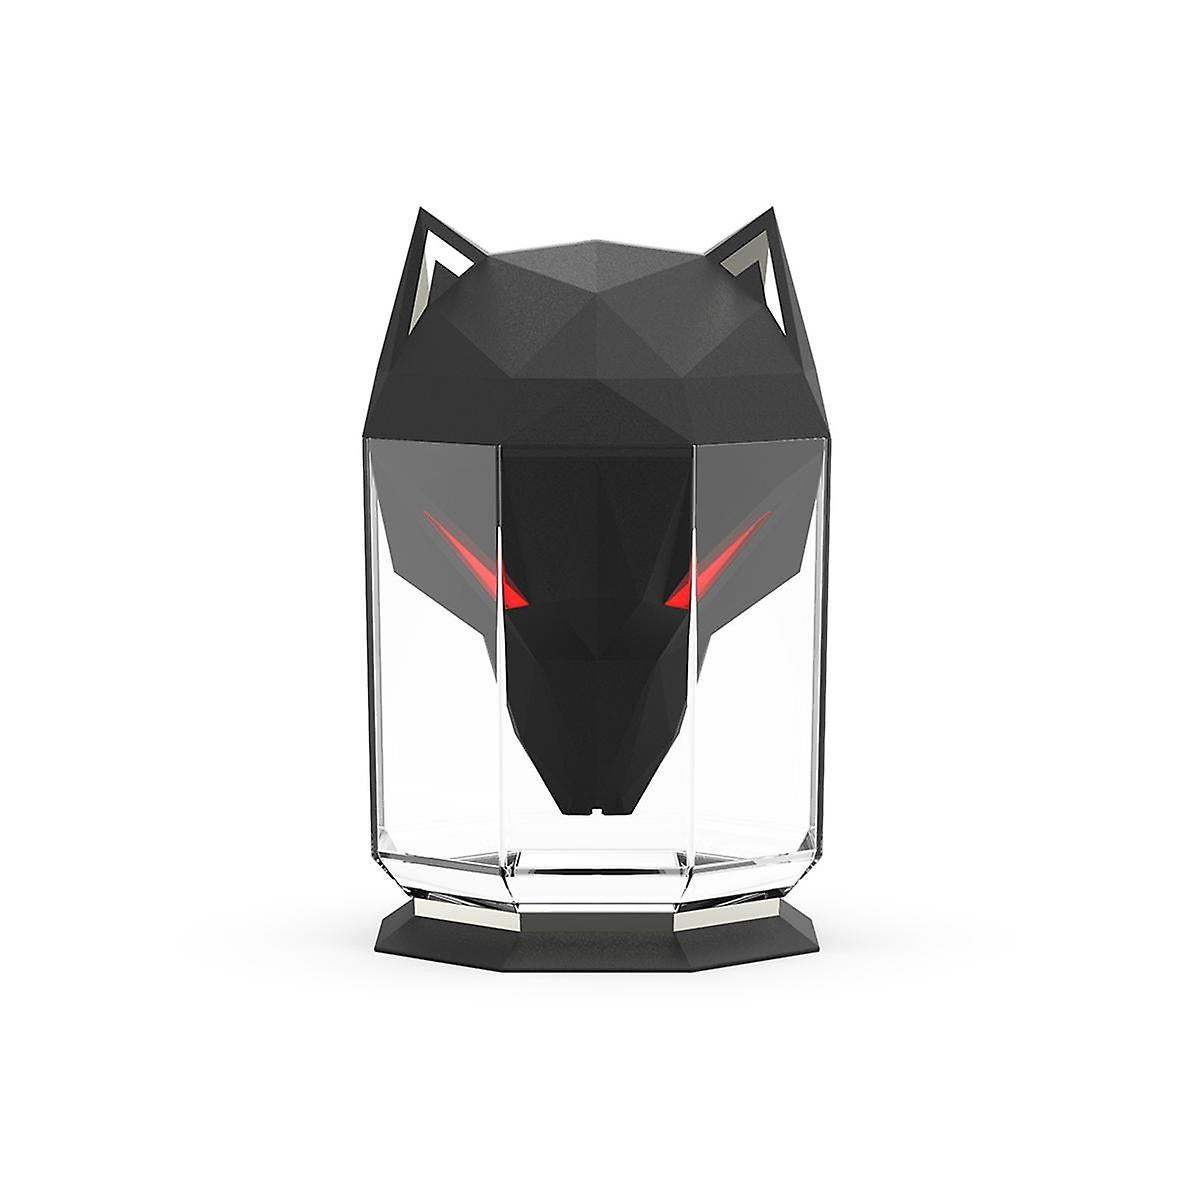 The Wolf Humidifier